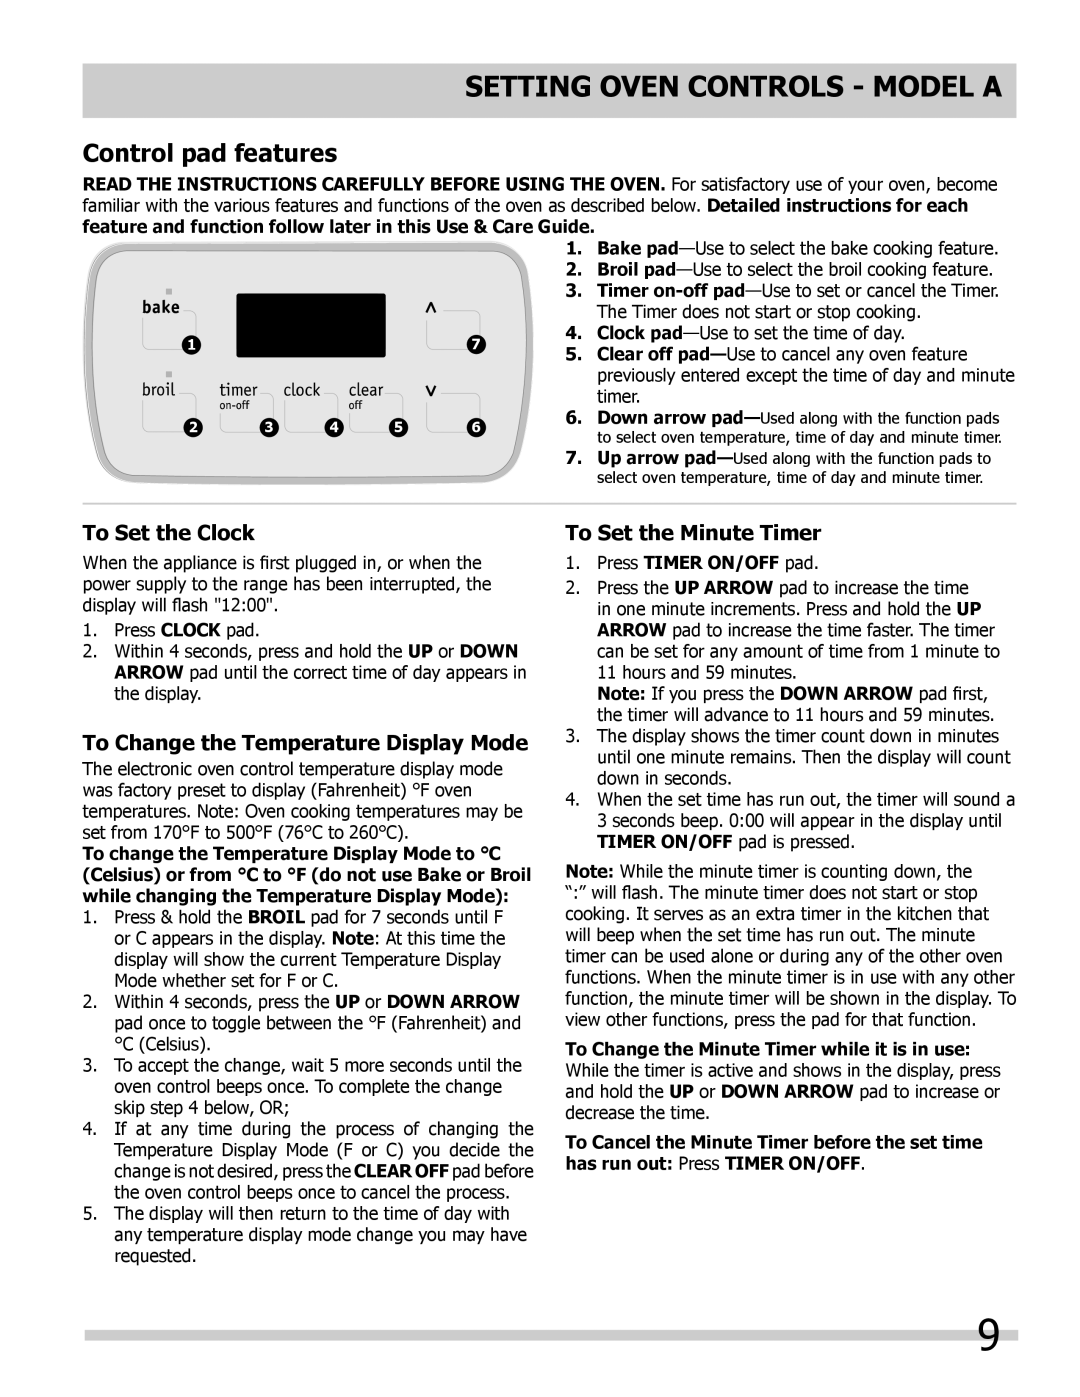 Frigidaire 318200964 Setting OVEN controls - Model A, Control pad features, To Set the Clock, To Set the Minute Timer 